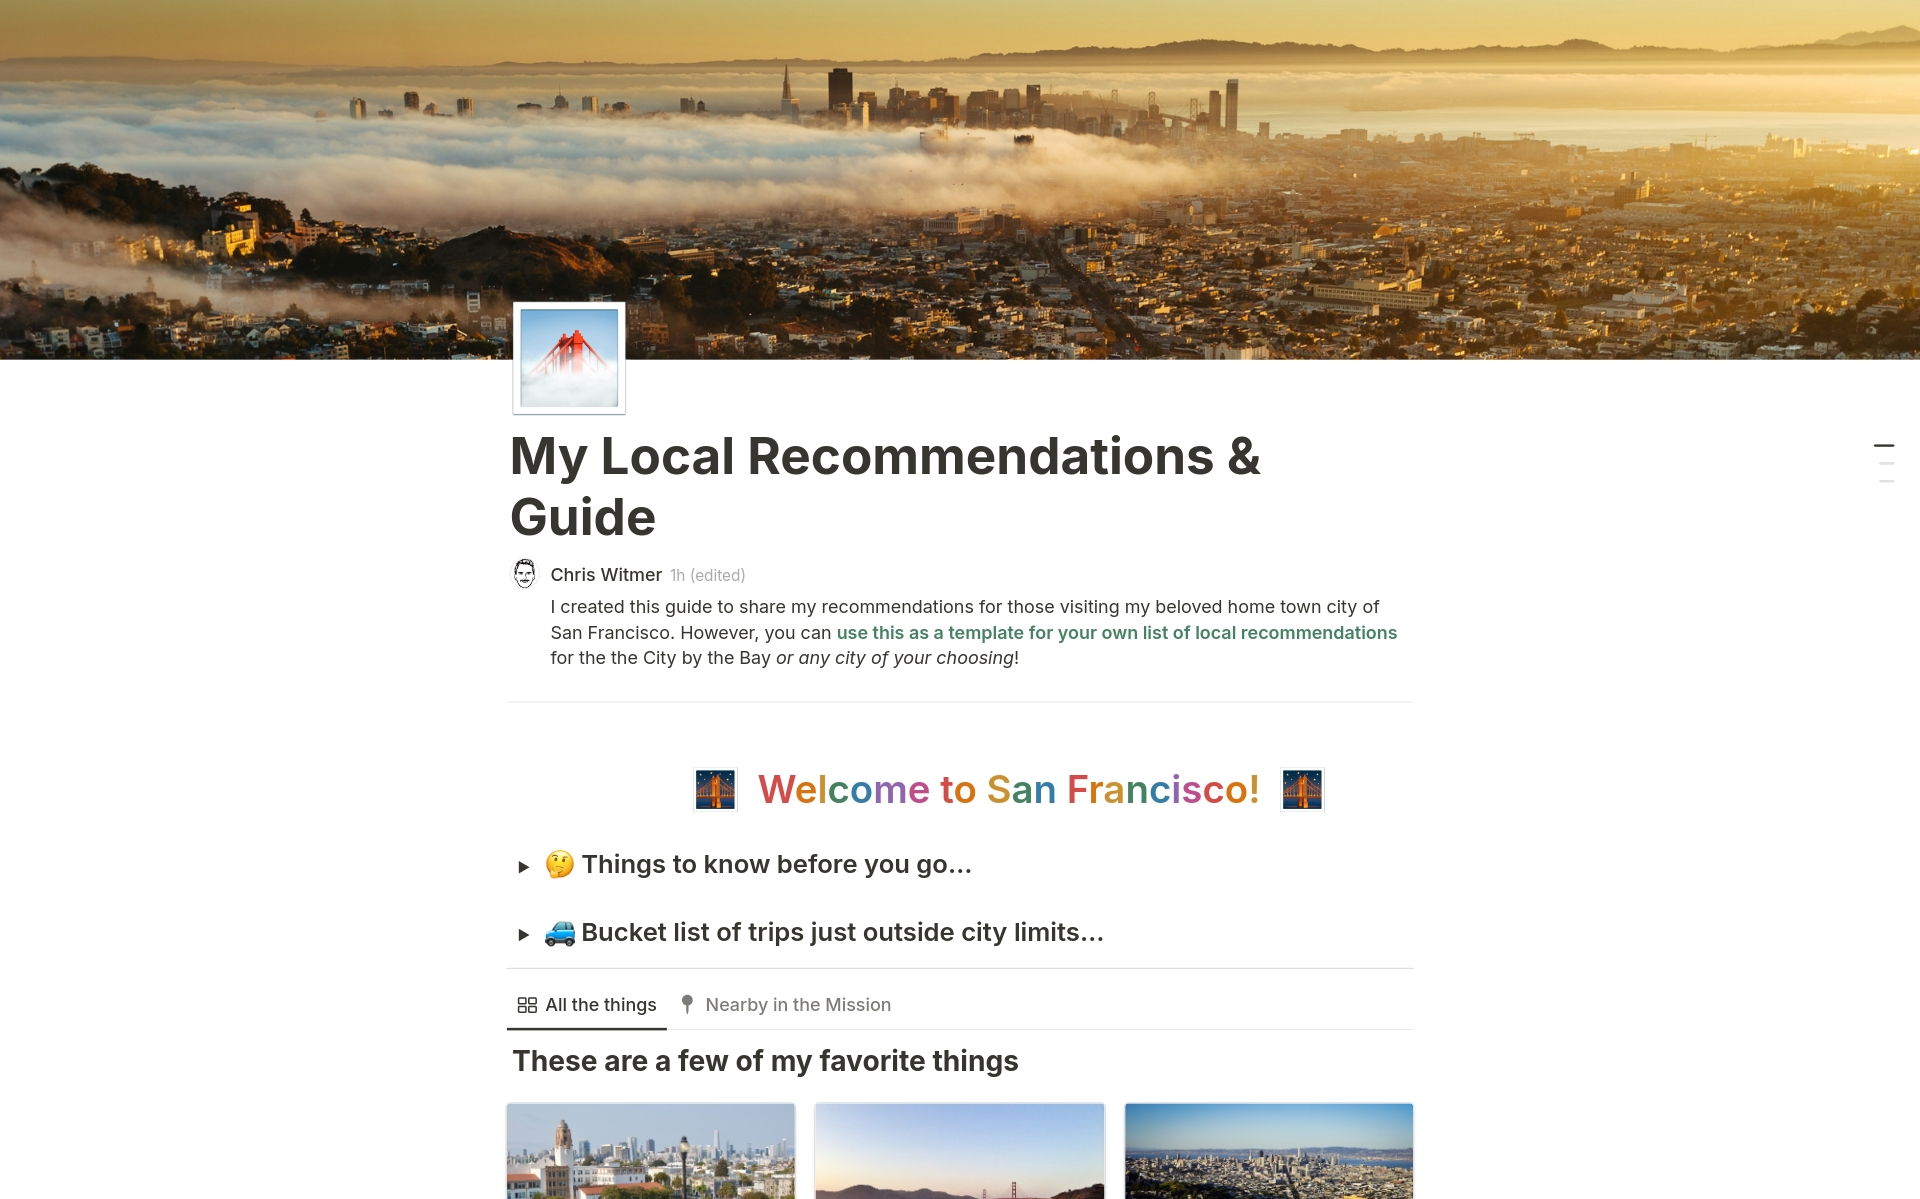 This comprehensive guide is perfect for anyone planning a trip to San Francisco or looking to create a personalized guide for any city. Use it as a ready-to-go destination guide or customize it to showcase your favorite spots and recommendations in any city of your choice.